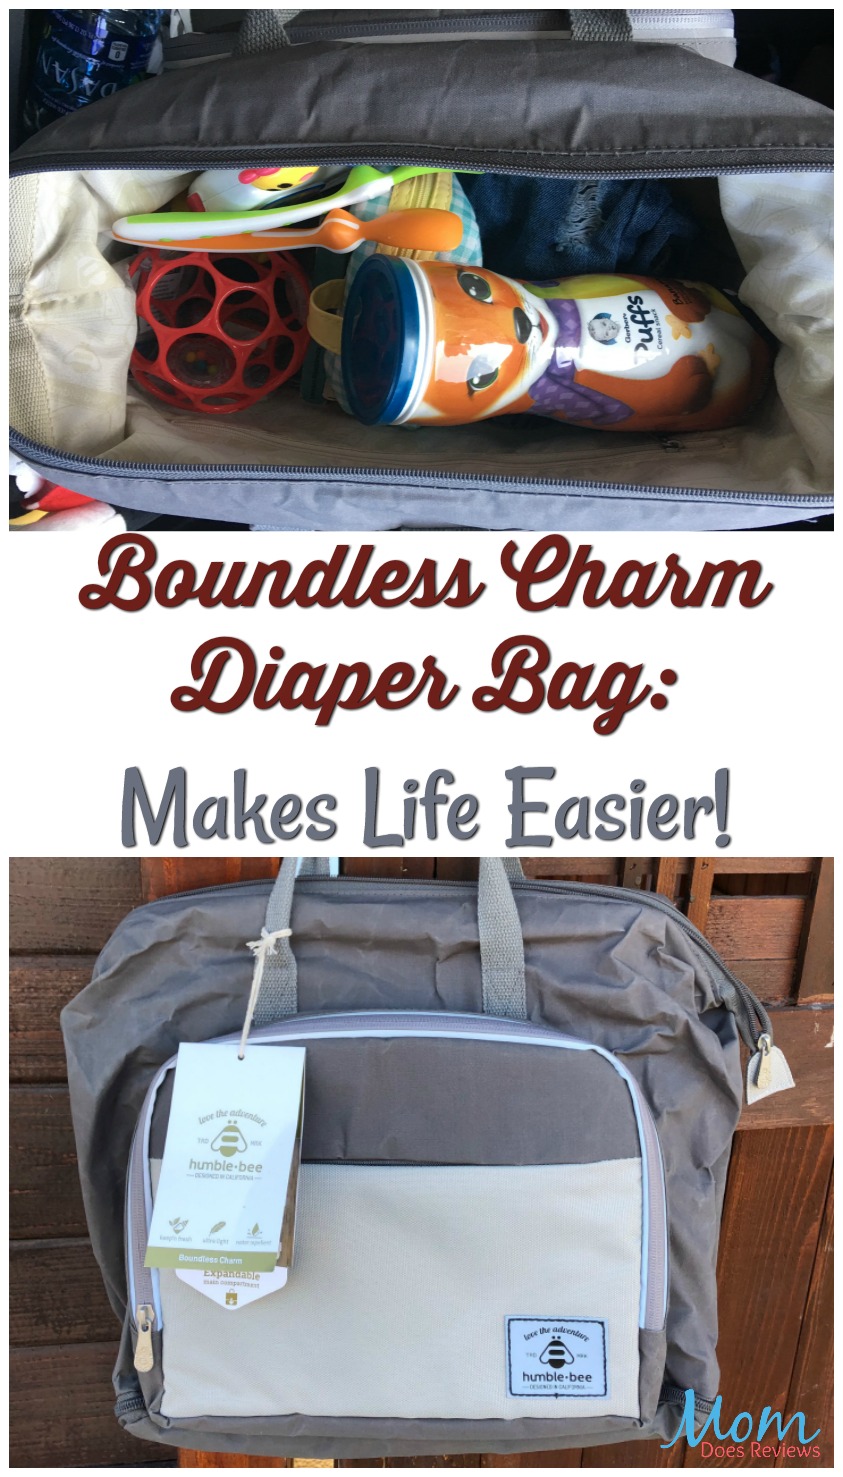 Boundless Charm Diaper Bag- The Only One You'll Need! #MDRSummerFun 